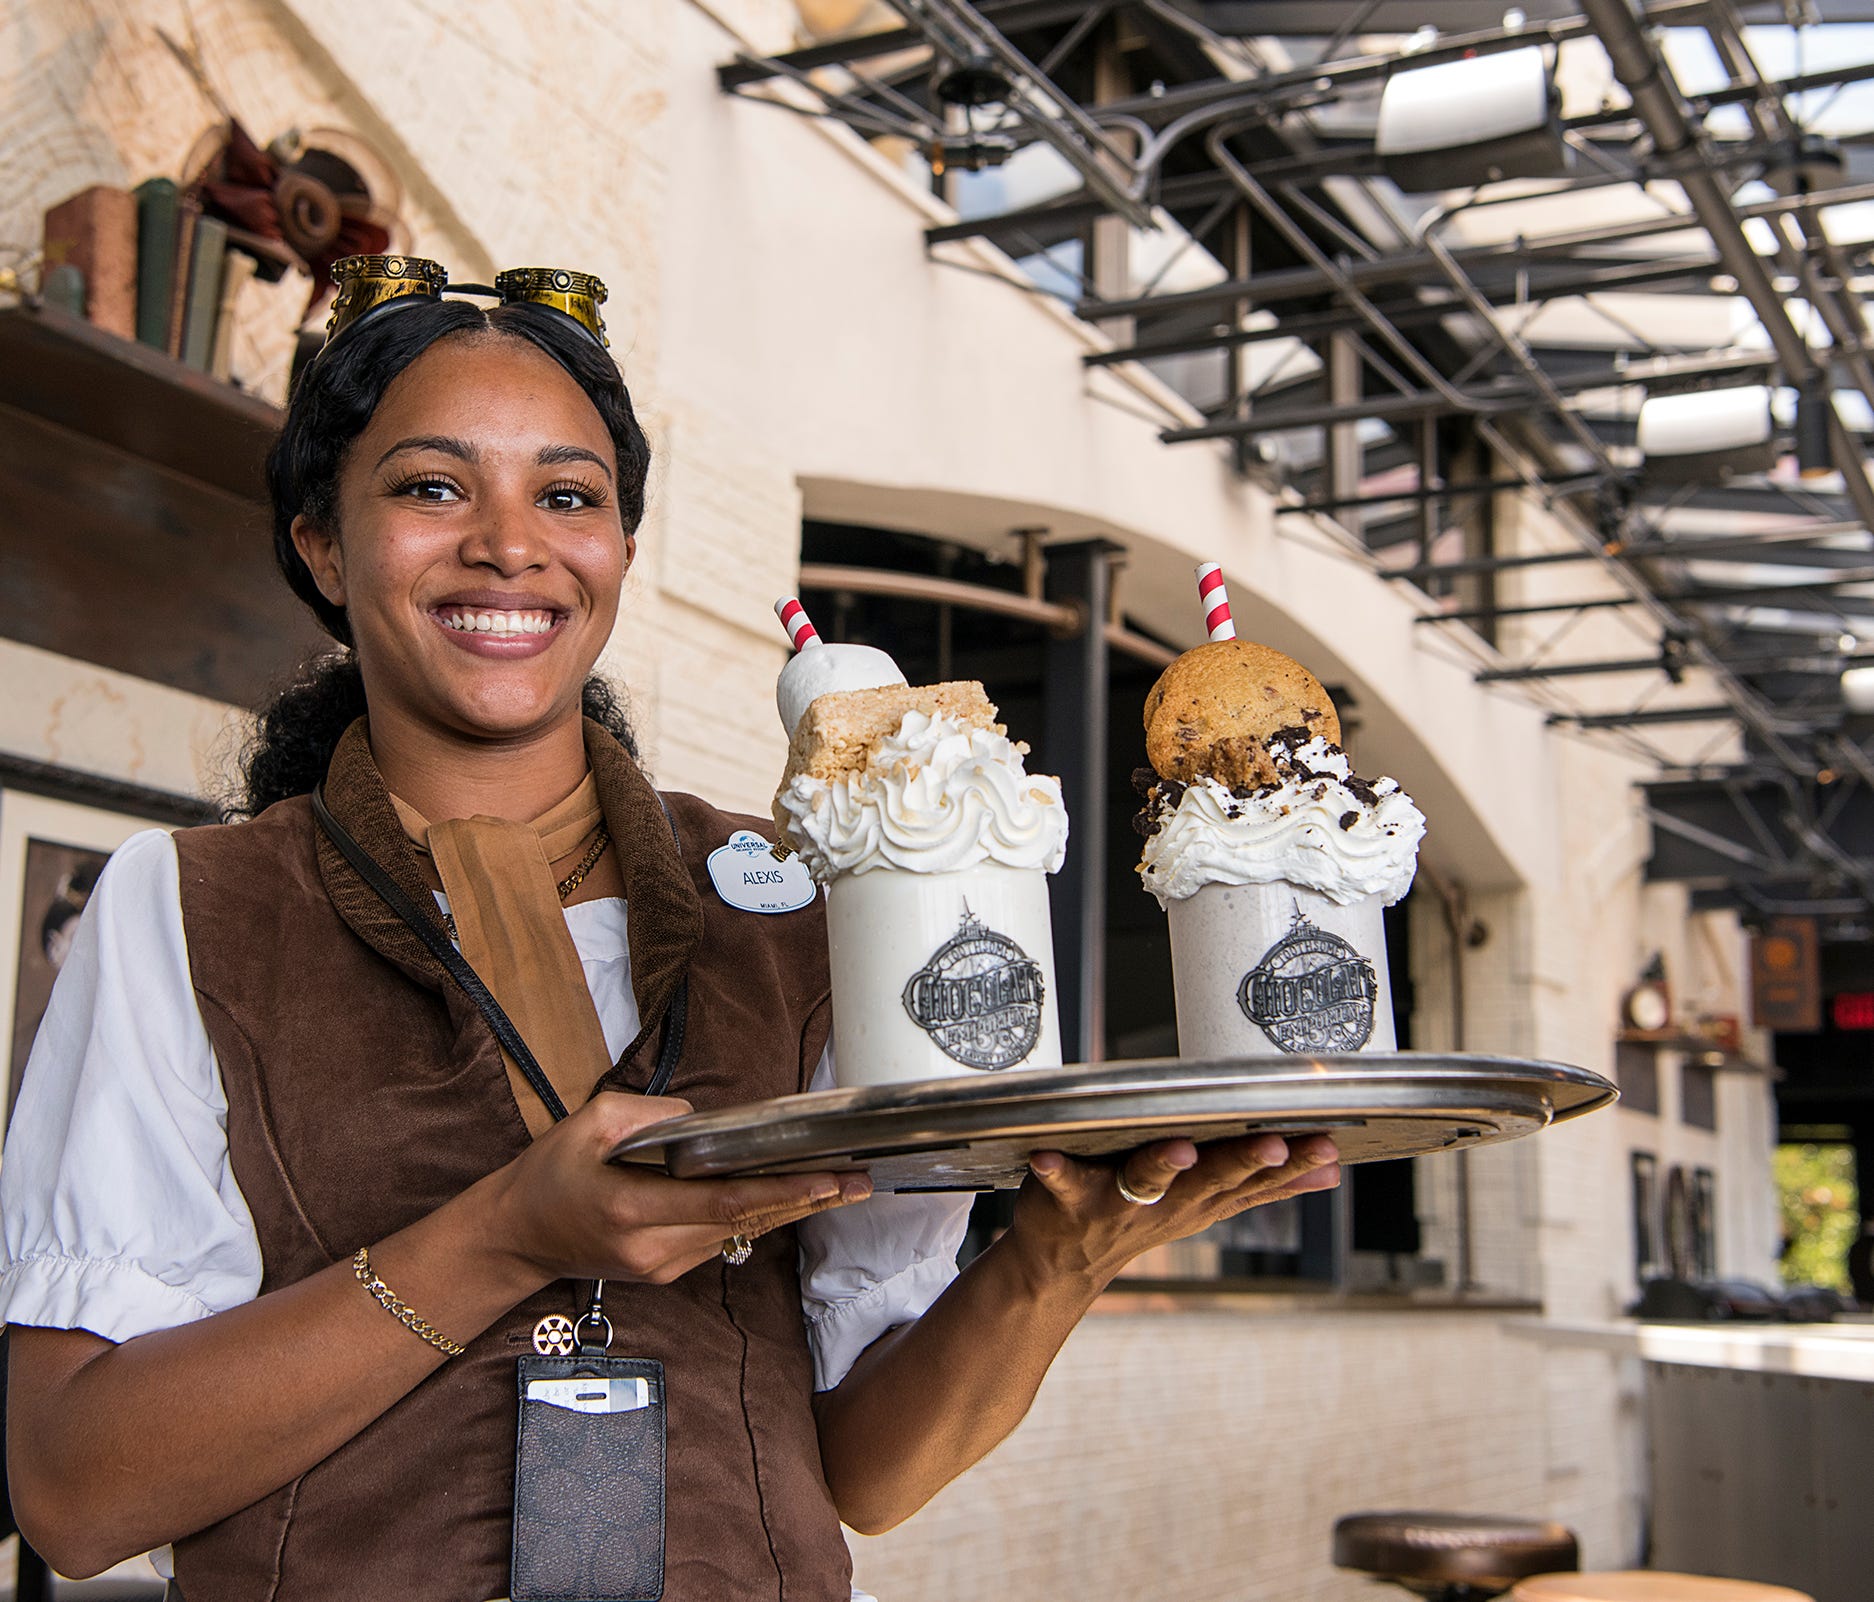 Alexis Thompson, a server at Toothsome Chocolate Emporium, displays two of the eatery's gargantuan milkshakes that highlight the menu. The Marshmallow Crisp includes a Kellogg's Rice Krispies treat, and the Cookie Jar includes cookie crumbles and a w